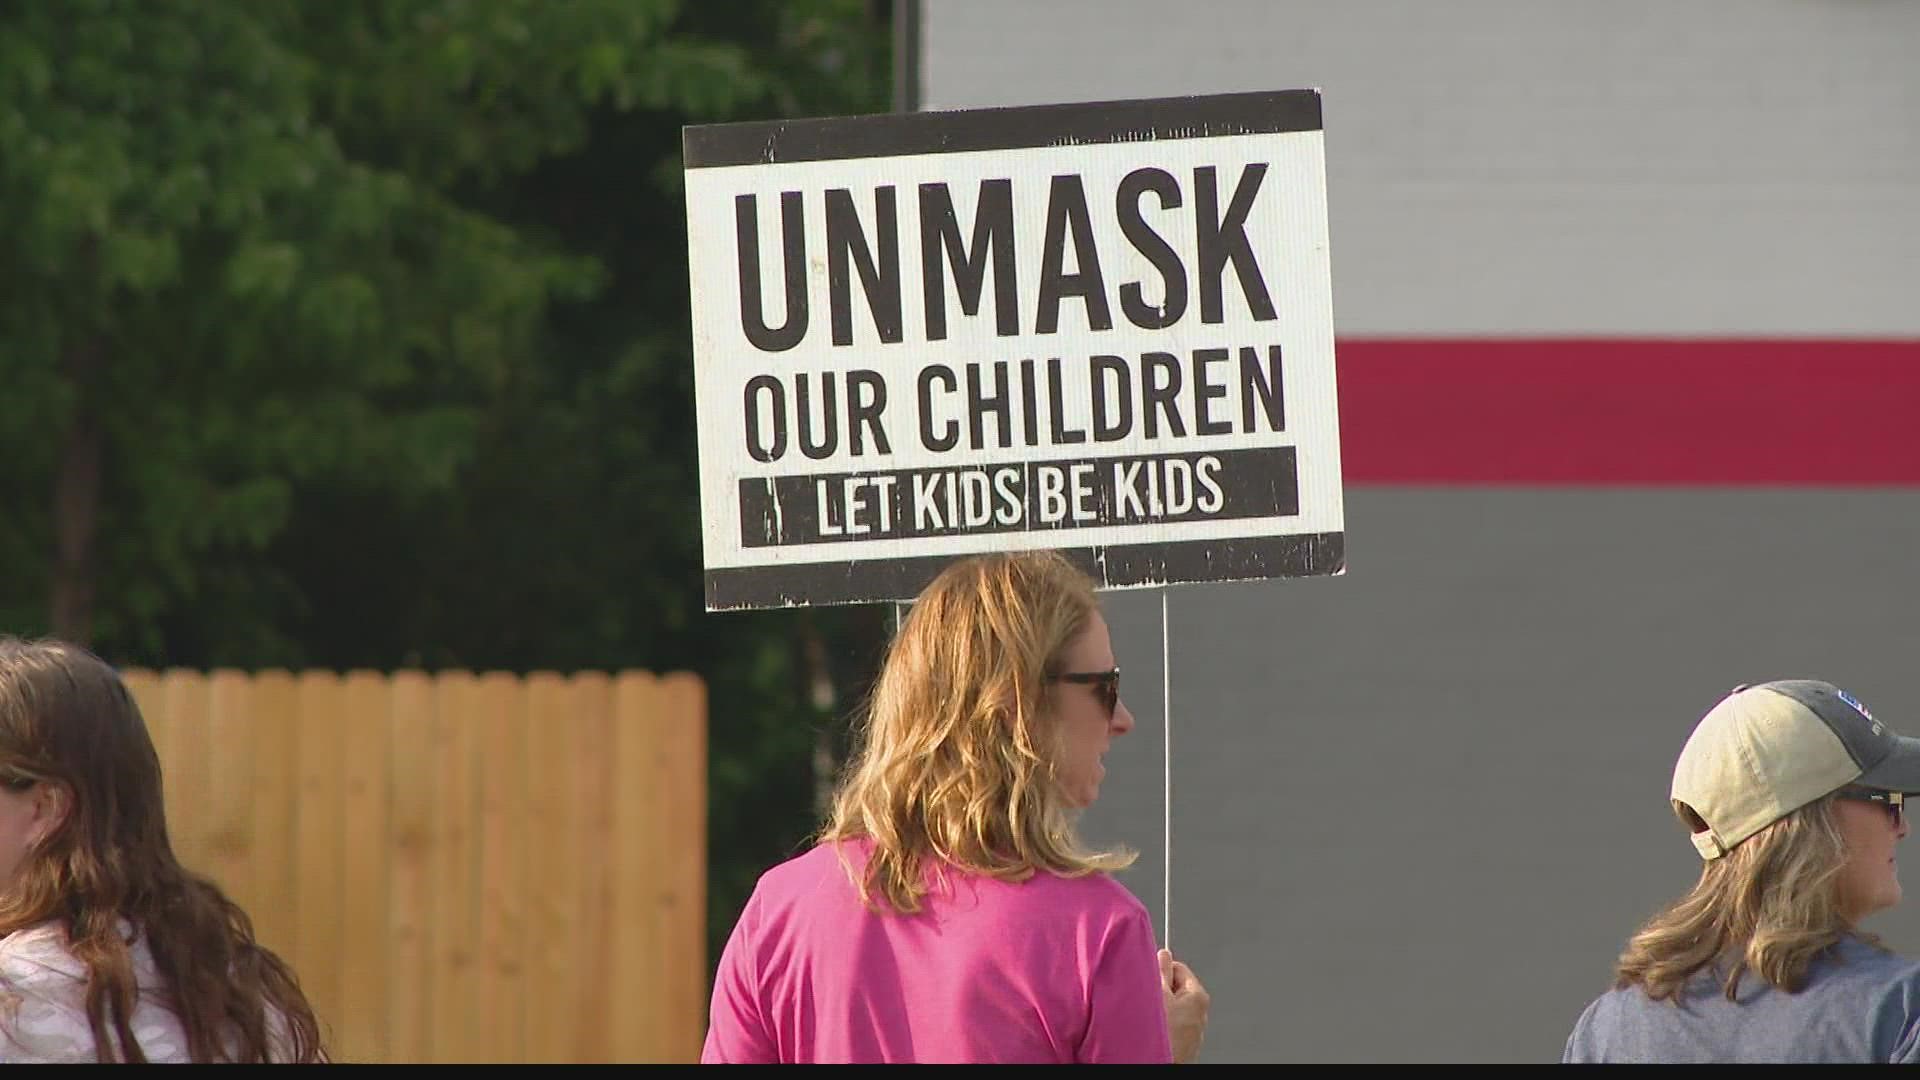 All K-6 students and staff in the district will now be required to wear masks, regardless of vaccination status.